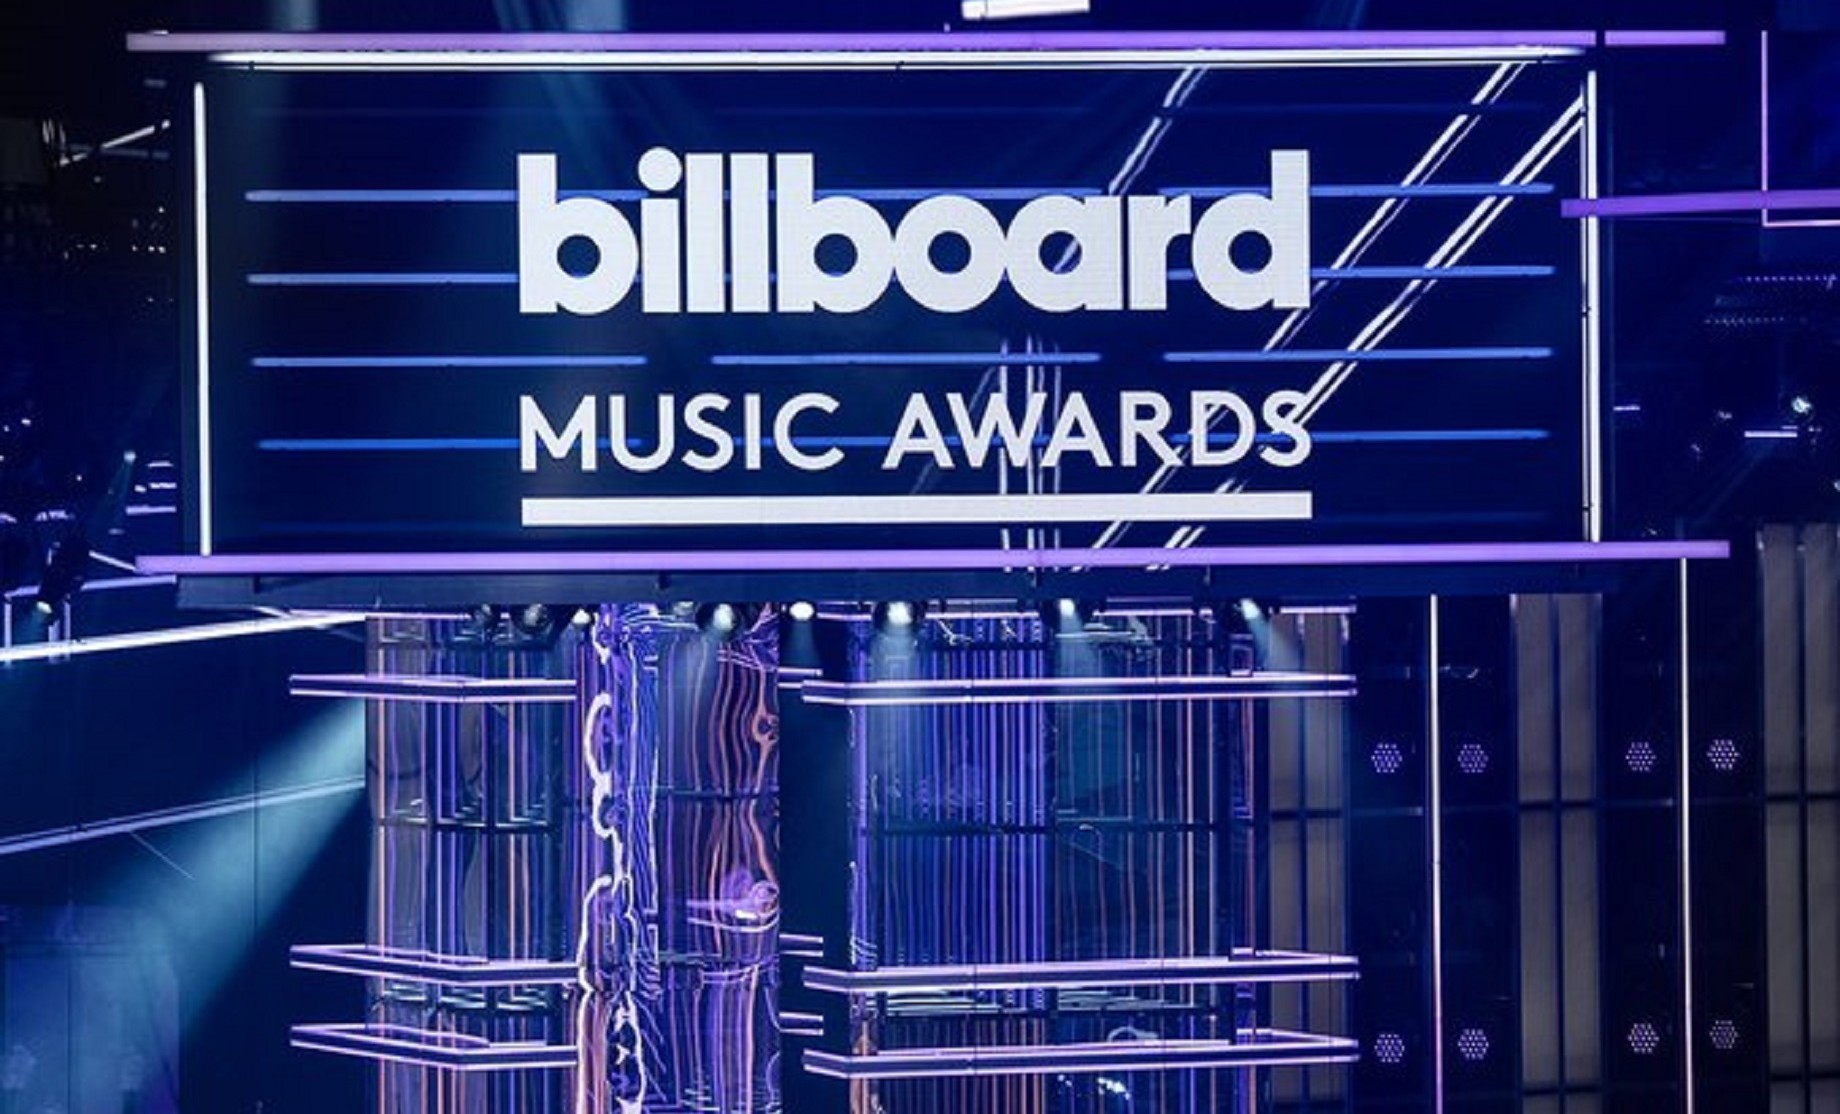 Billboard Music Awards Ceremony to be Held